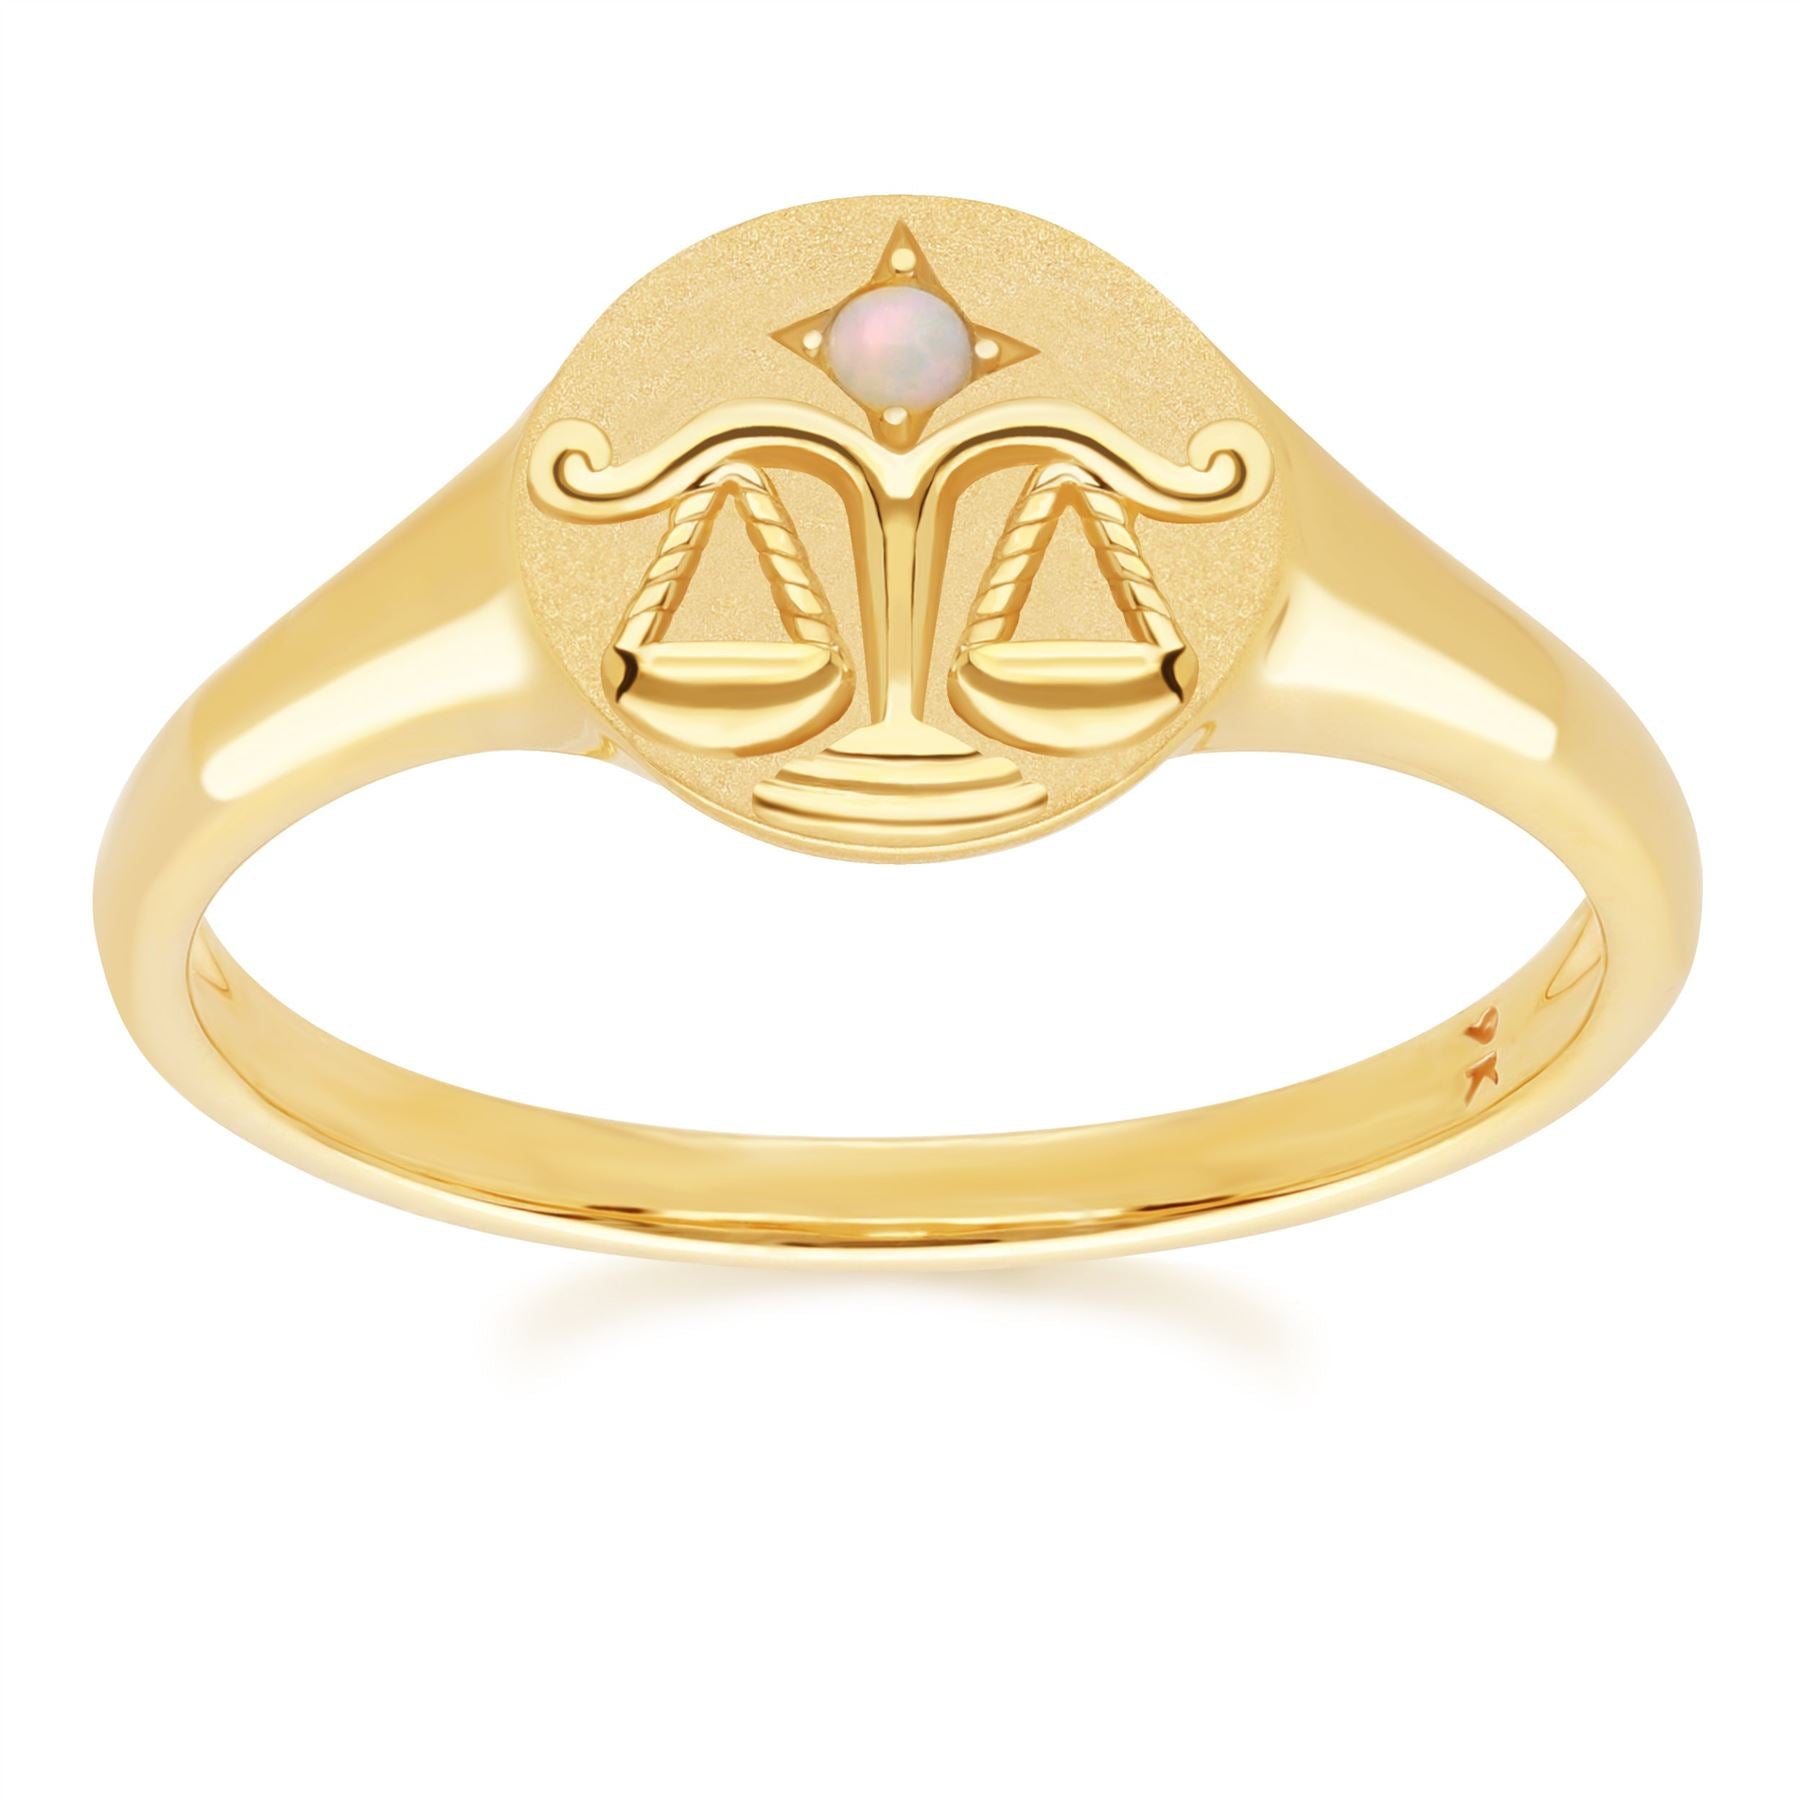 Zodiac Opal Libra Signet Ring In 9ct Yellow GoldFront  135R2087019